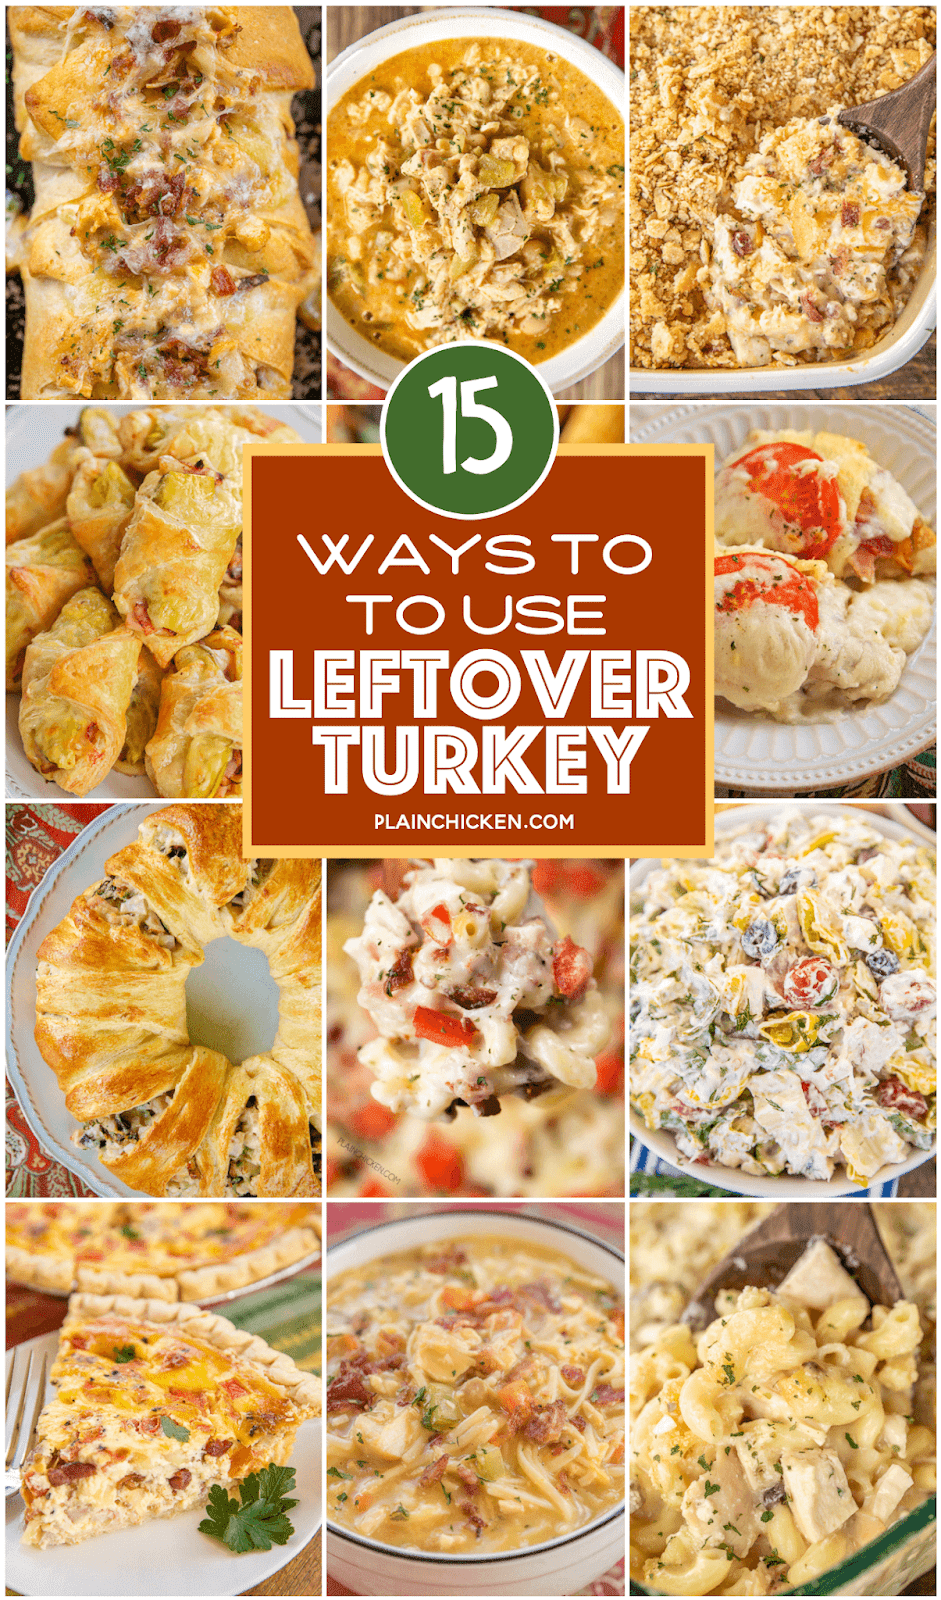 What To Make With Leftover Turkey - Plain Chicken -   19 leftover turkey recipes easy ideas